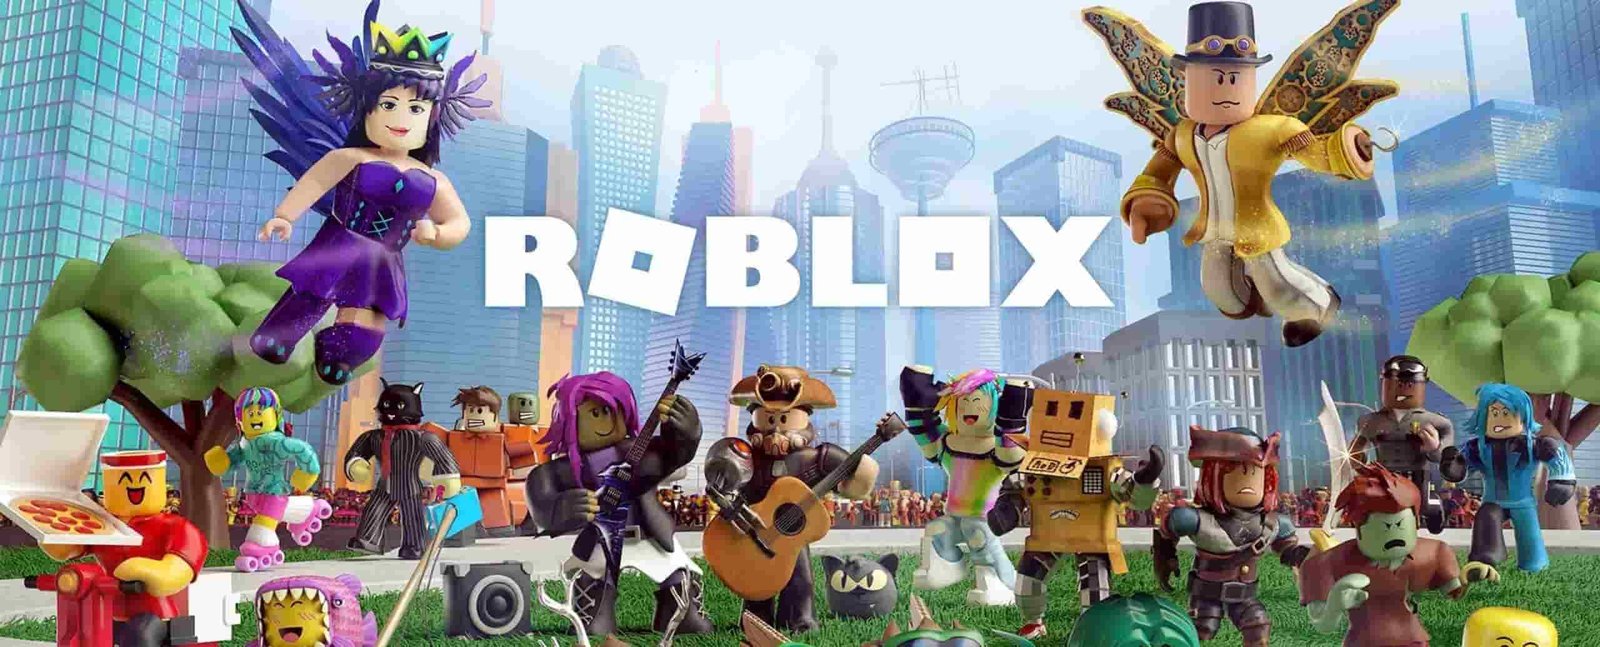 Roblox Voice Chat Feature Might Only Work For 18 Users Suggests Code Digistatement - roblox work